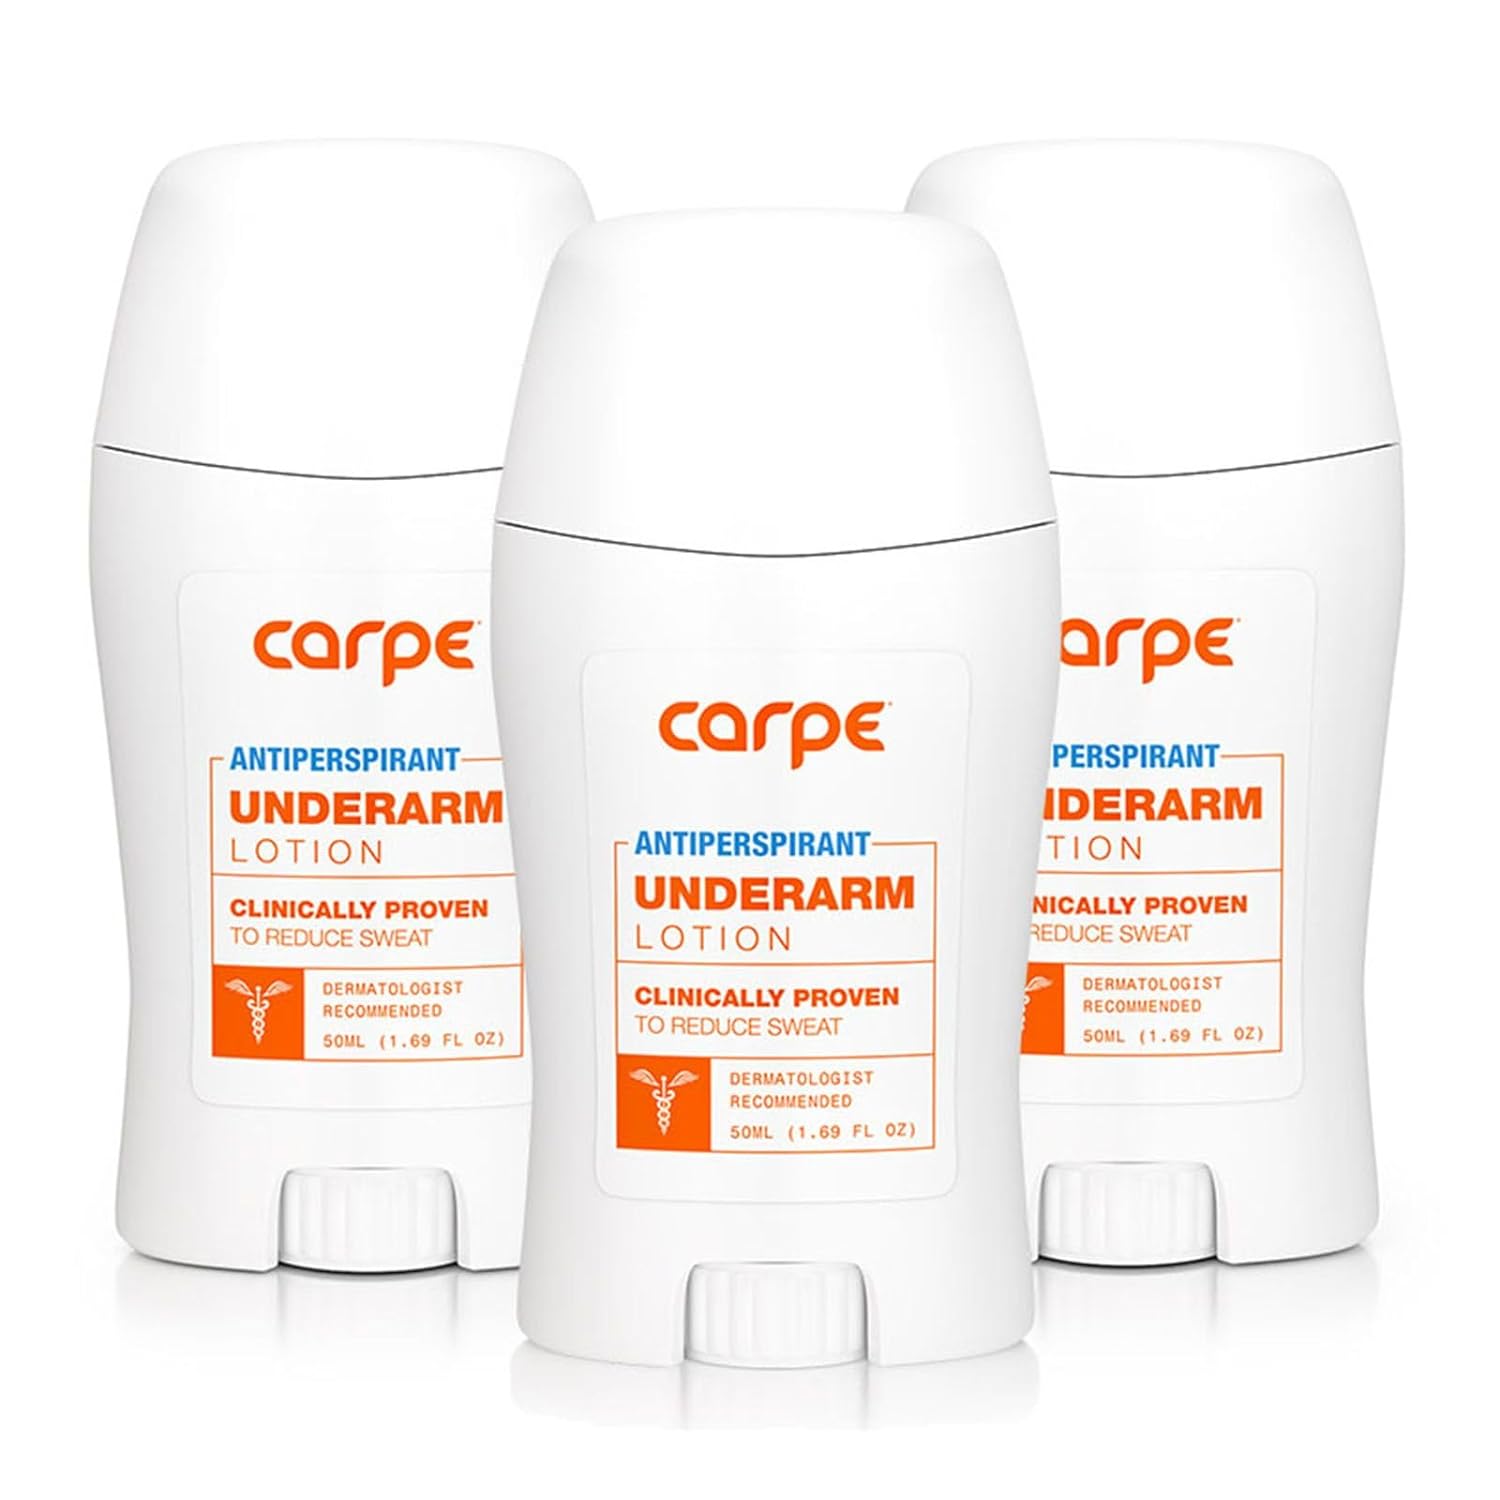 Carpe Underarm Antiperspirant and Deodorant, Clinical strength antiperspirant with all-natural eucalyptus scent, Combat excessive sweating and stay fresh. Great for hyperhidrosis (Pack of 3)